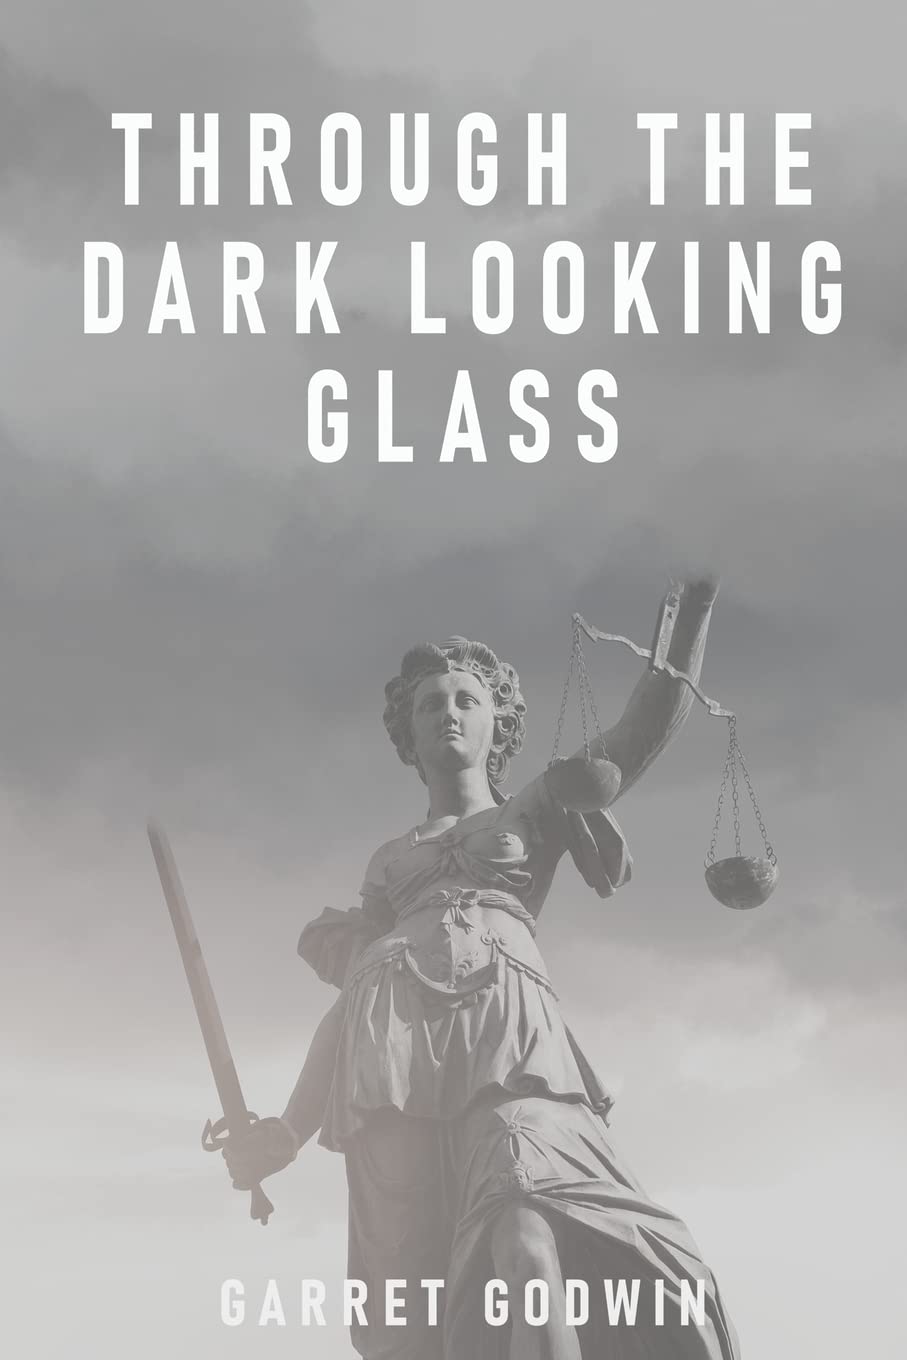 Author's Tranquility Press introduces 'Through the Dark Looking Glass': a haunting and thought-provoking exploration of loss and grief 